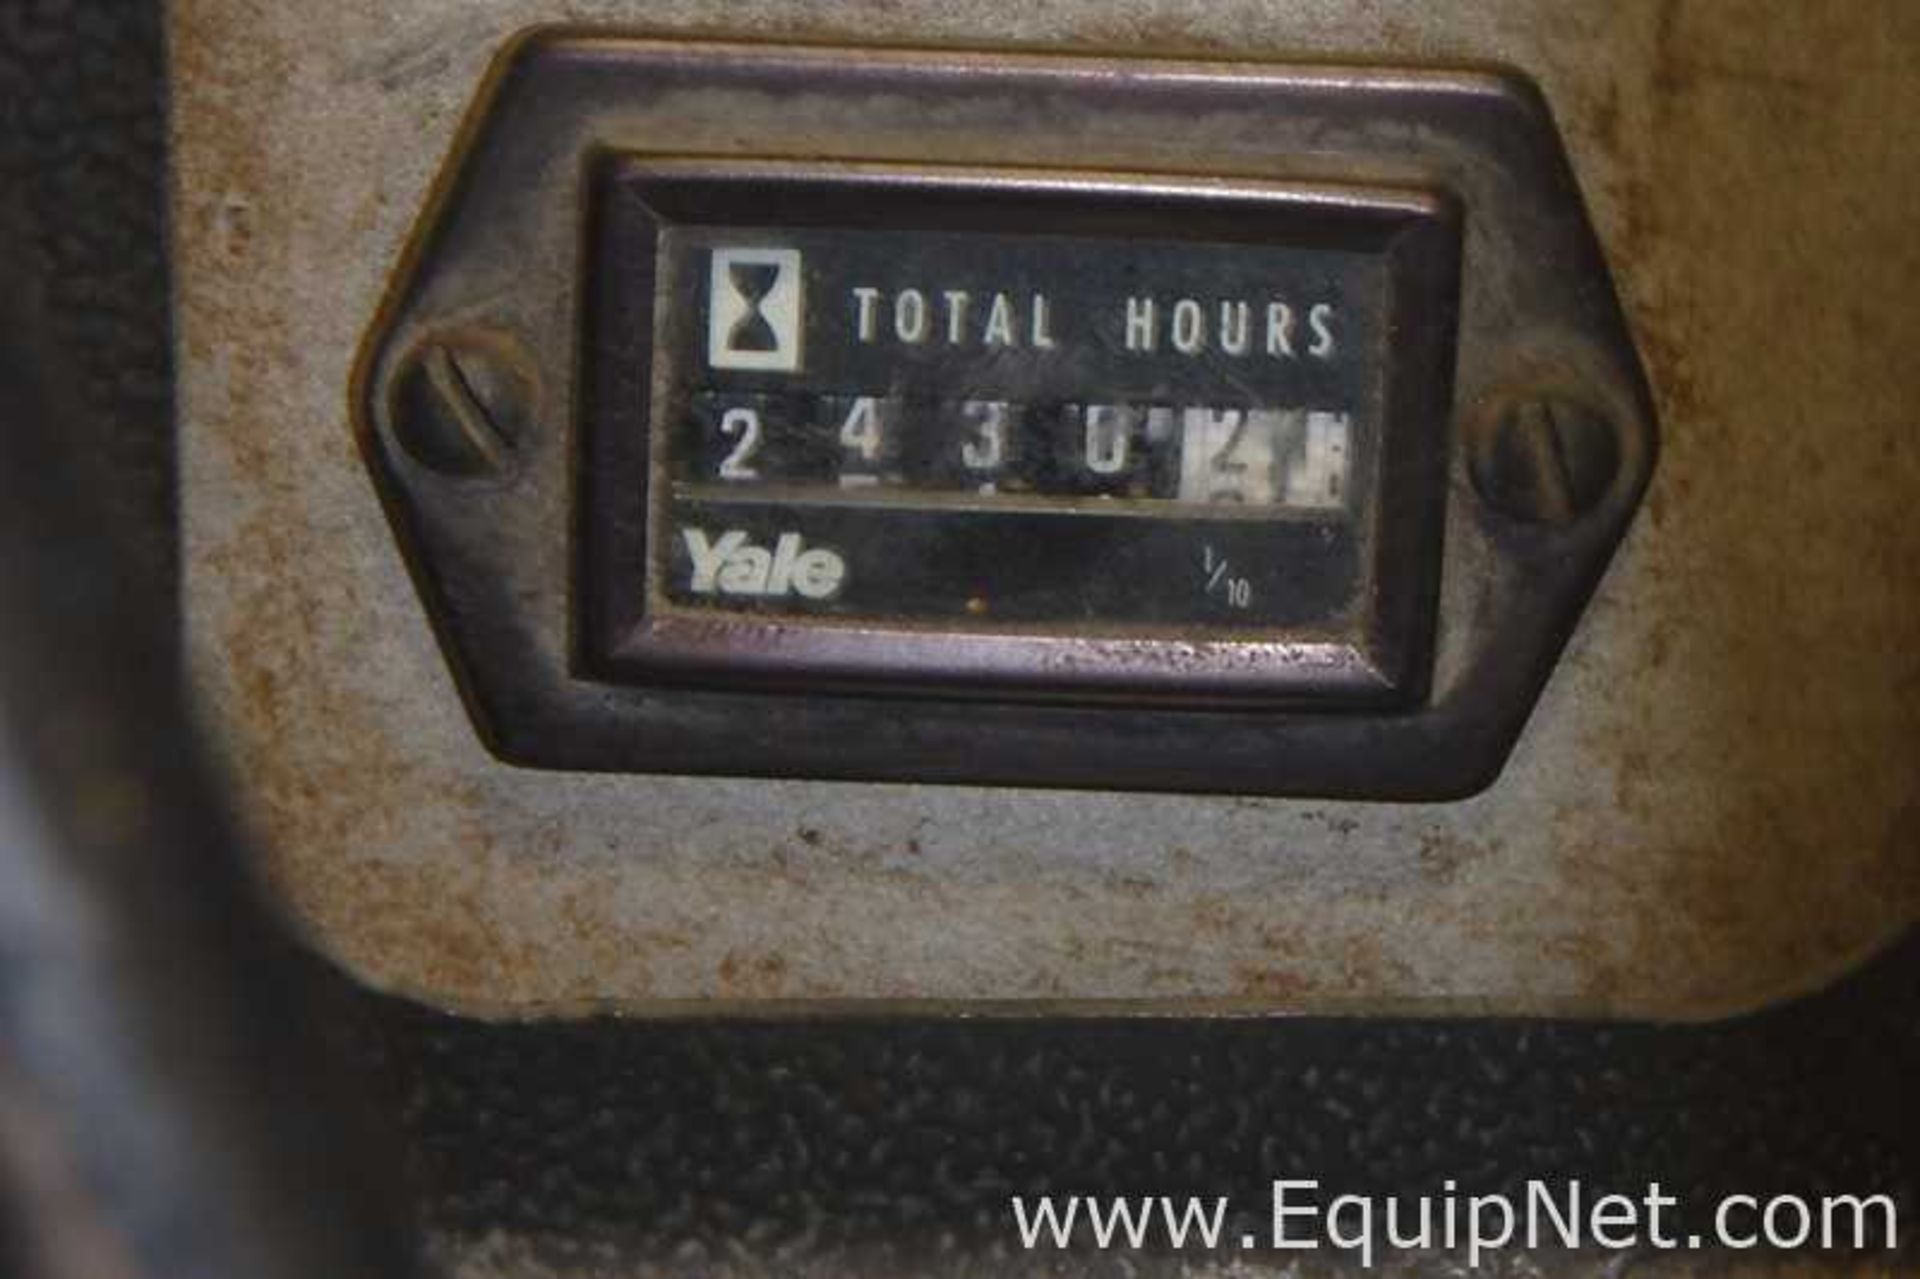 Yale NE030MAN24ST088 Battery Operated Stand-Up Forklift - Image 7 of 11